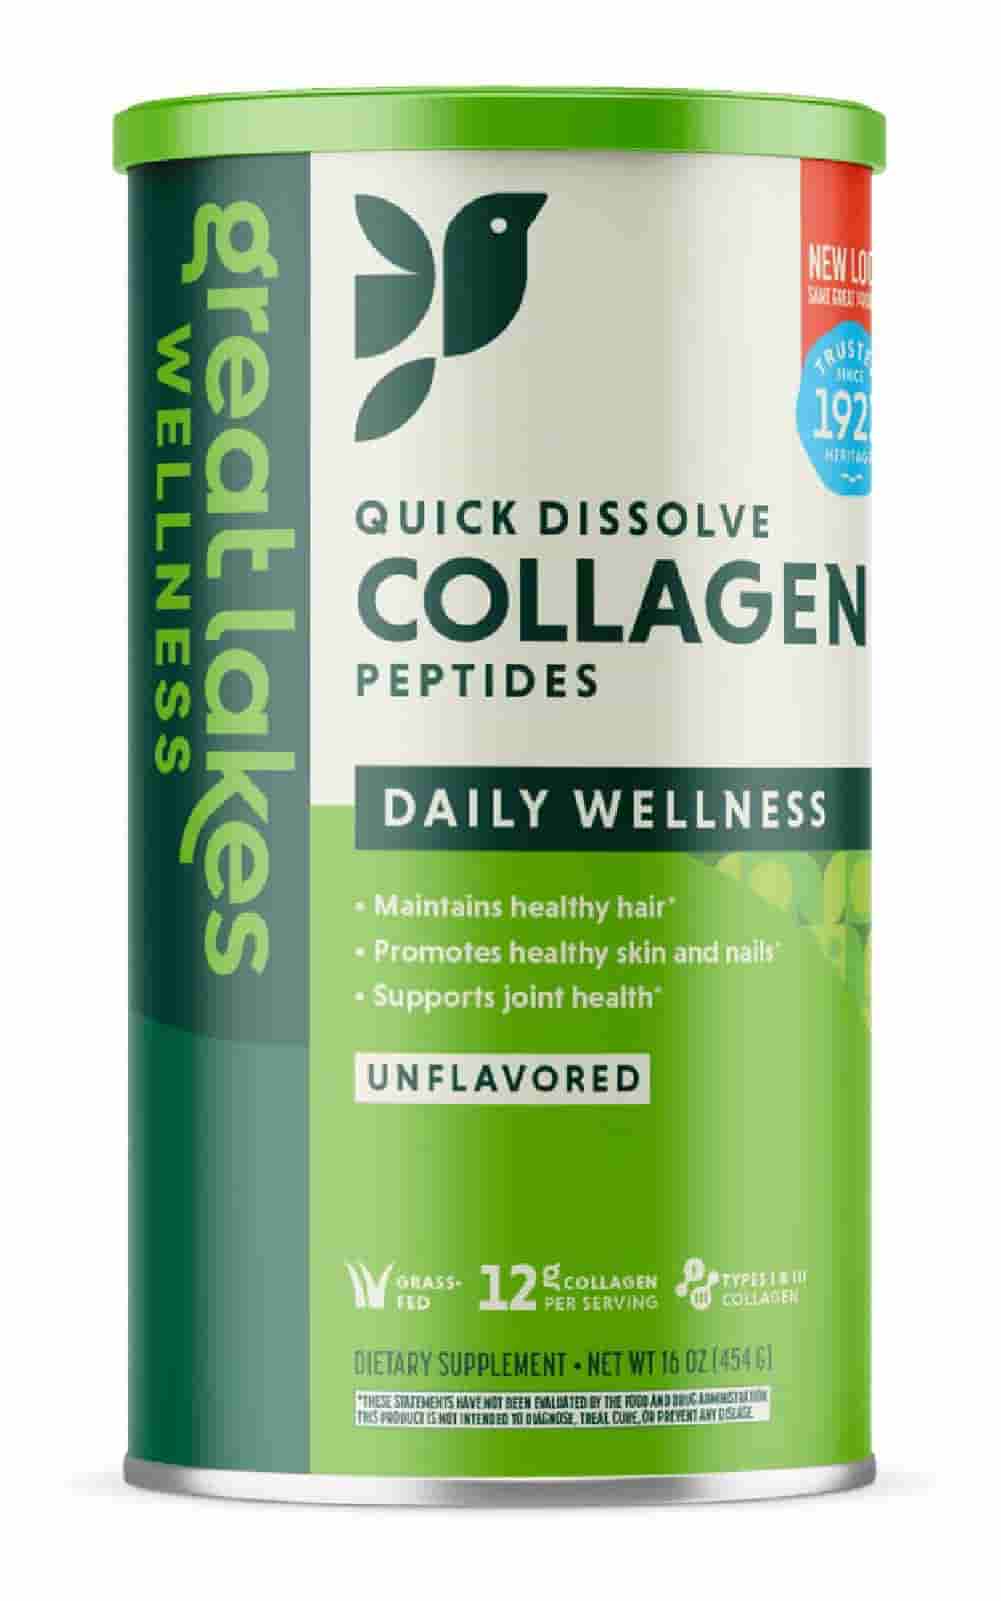 Buy Great Lakes Wellness Collagen Peptides 454 g at LiveHelfi